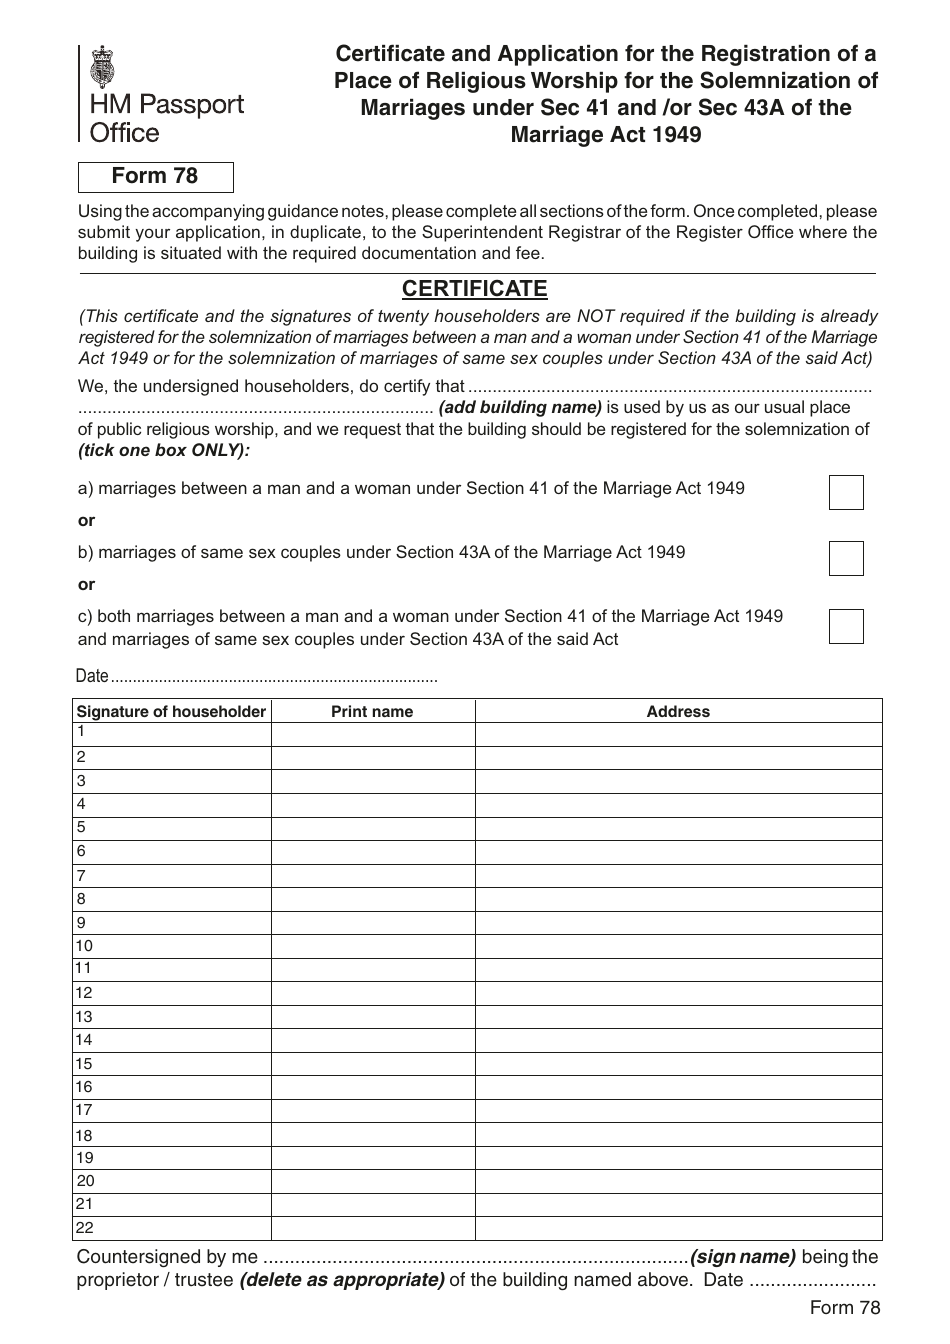 Form 78 Certificate and Application for the Registration of a Place of Religious Worship for the Solemnization of Marriages Under SEC 41 and / or SEC 43a of the Marriage Act 1949 - United Kingdom, Page 1